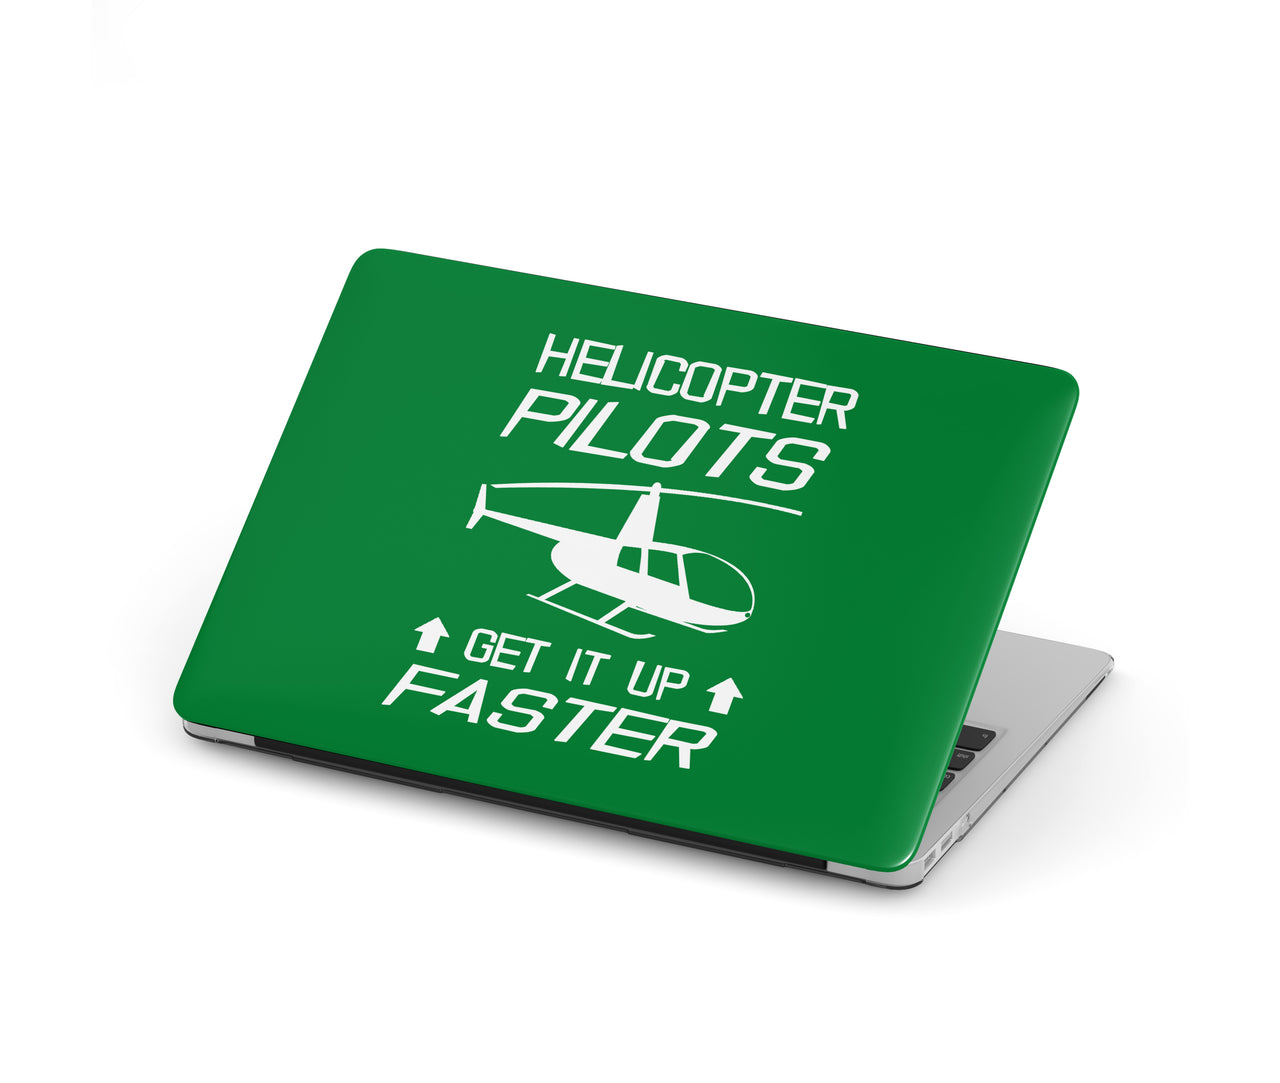 Helicopter Pilots Get It Up Faster Designed Macbook Cases